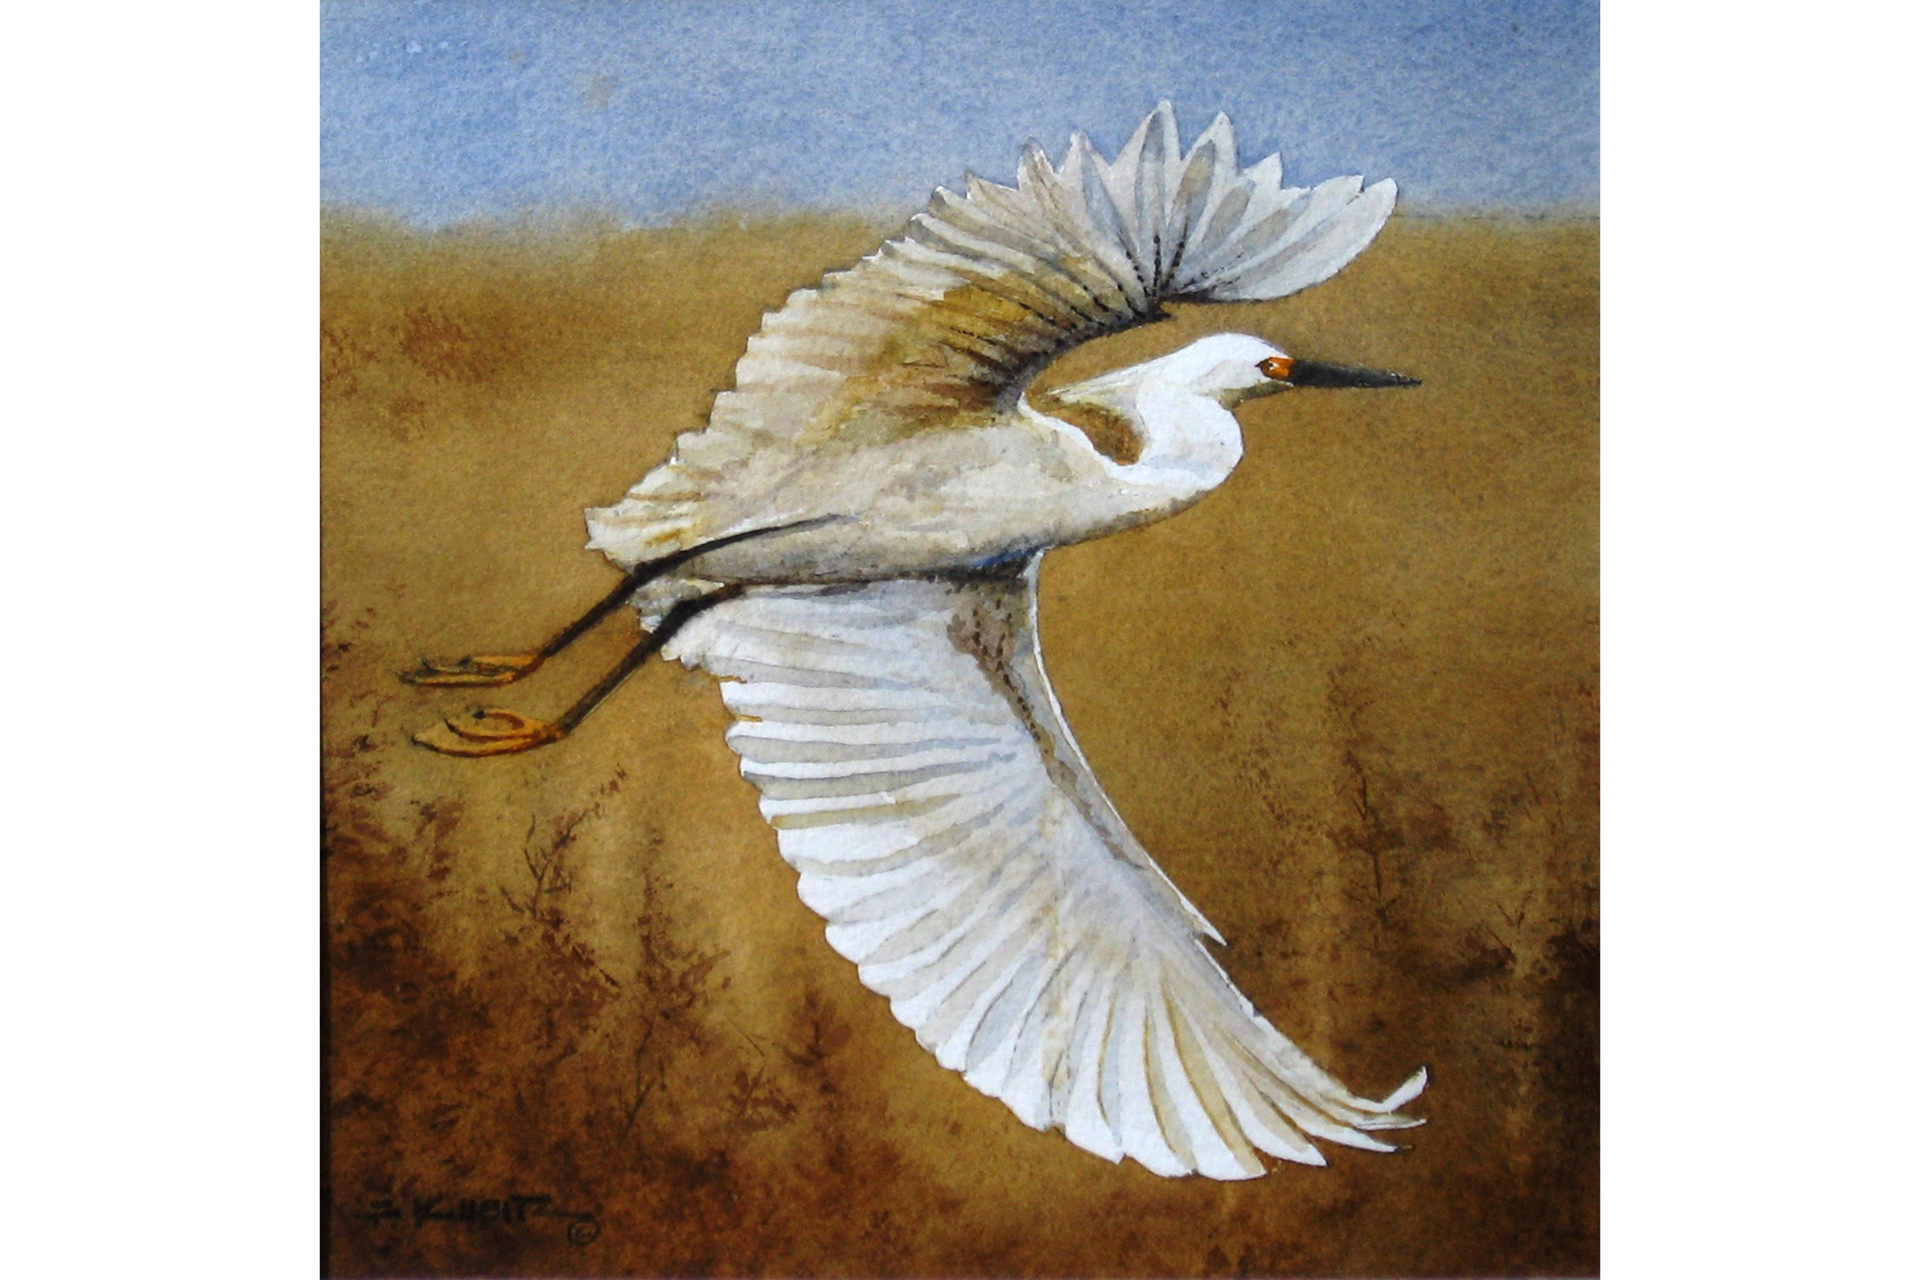 Watercolor painting depicting an egret in flight